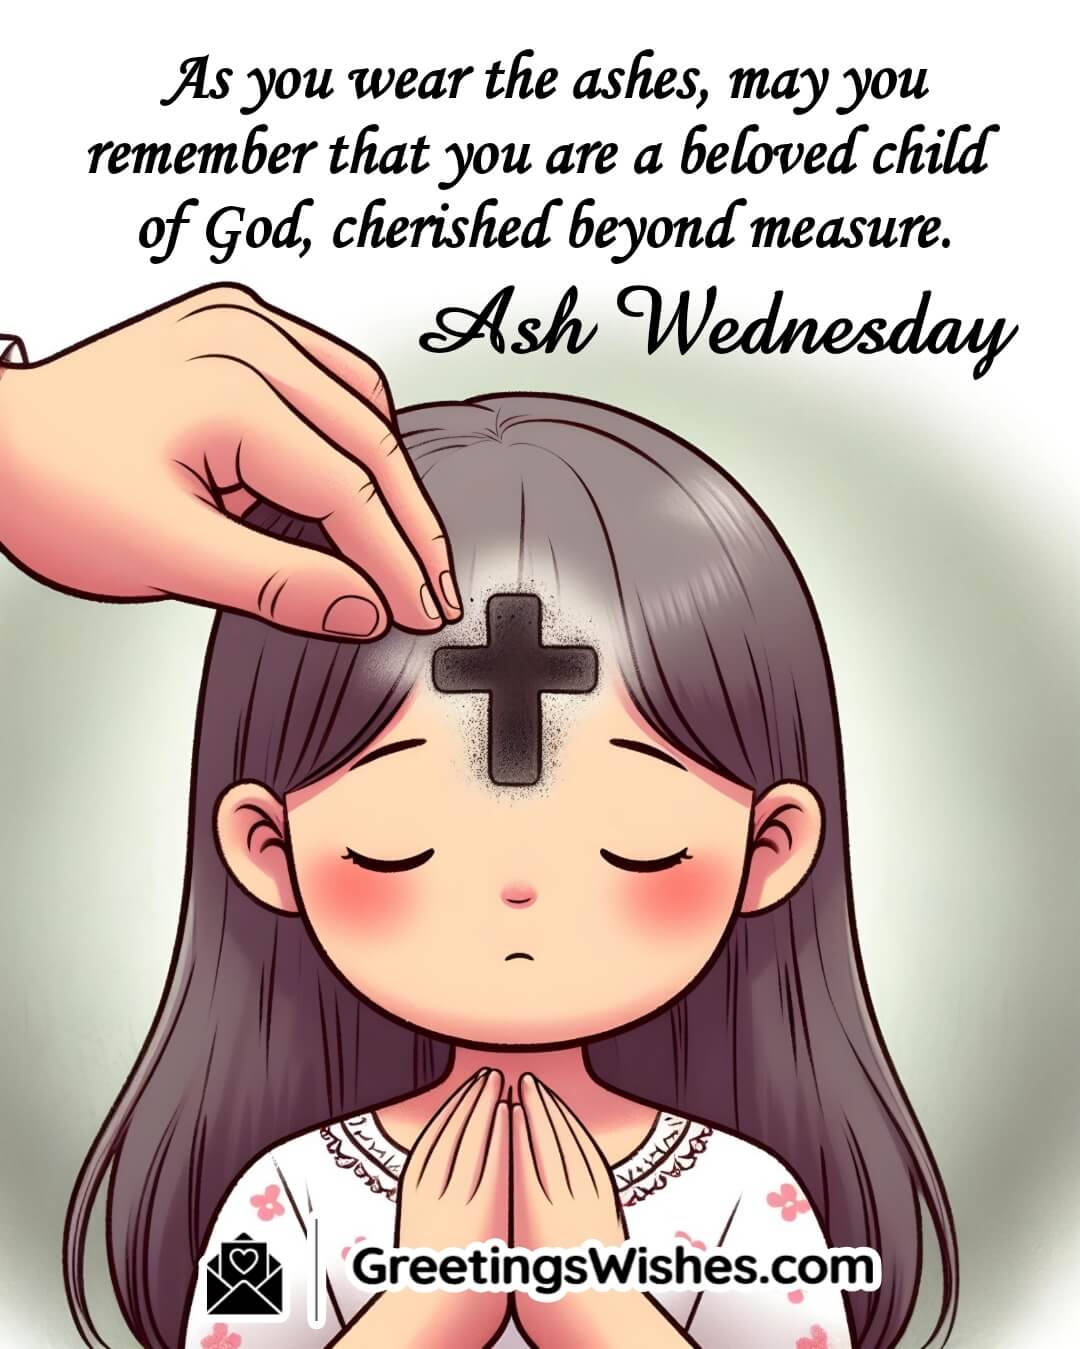 Ash Wednesday Wishes For Children